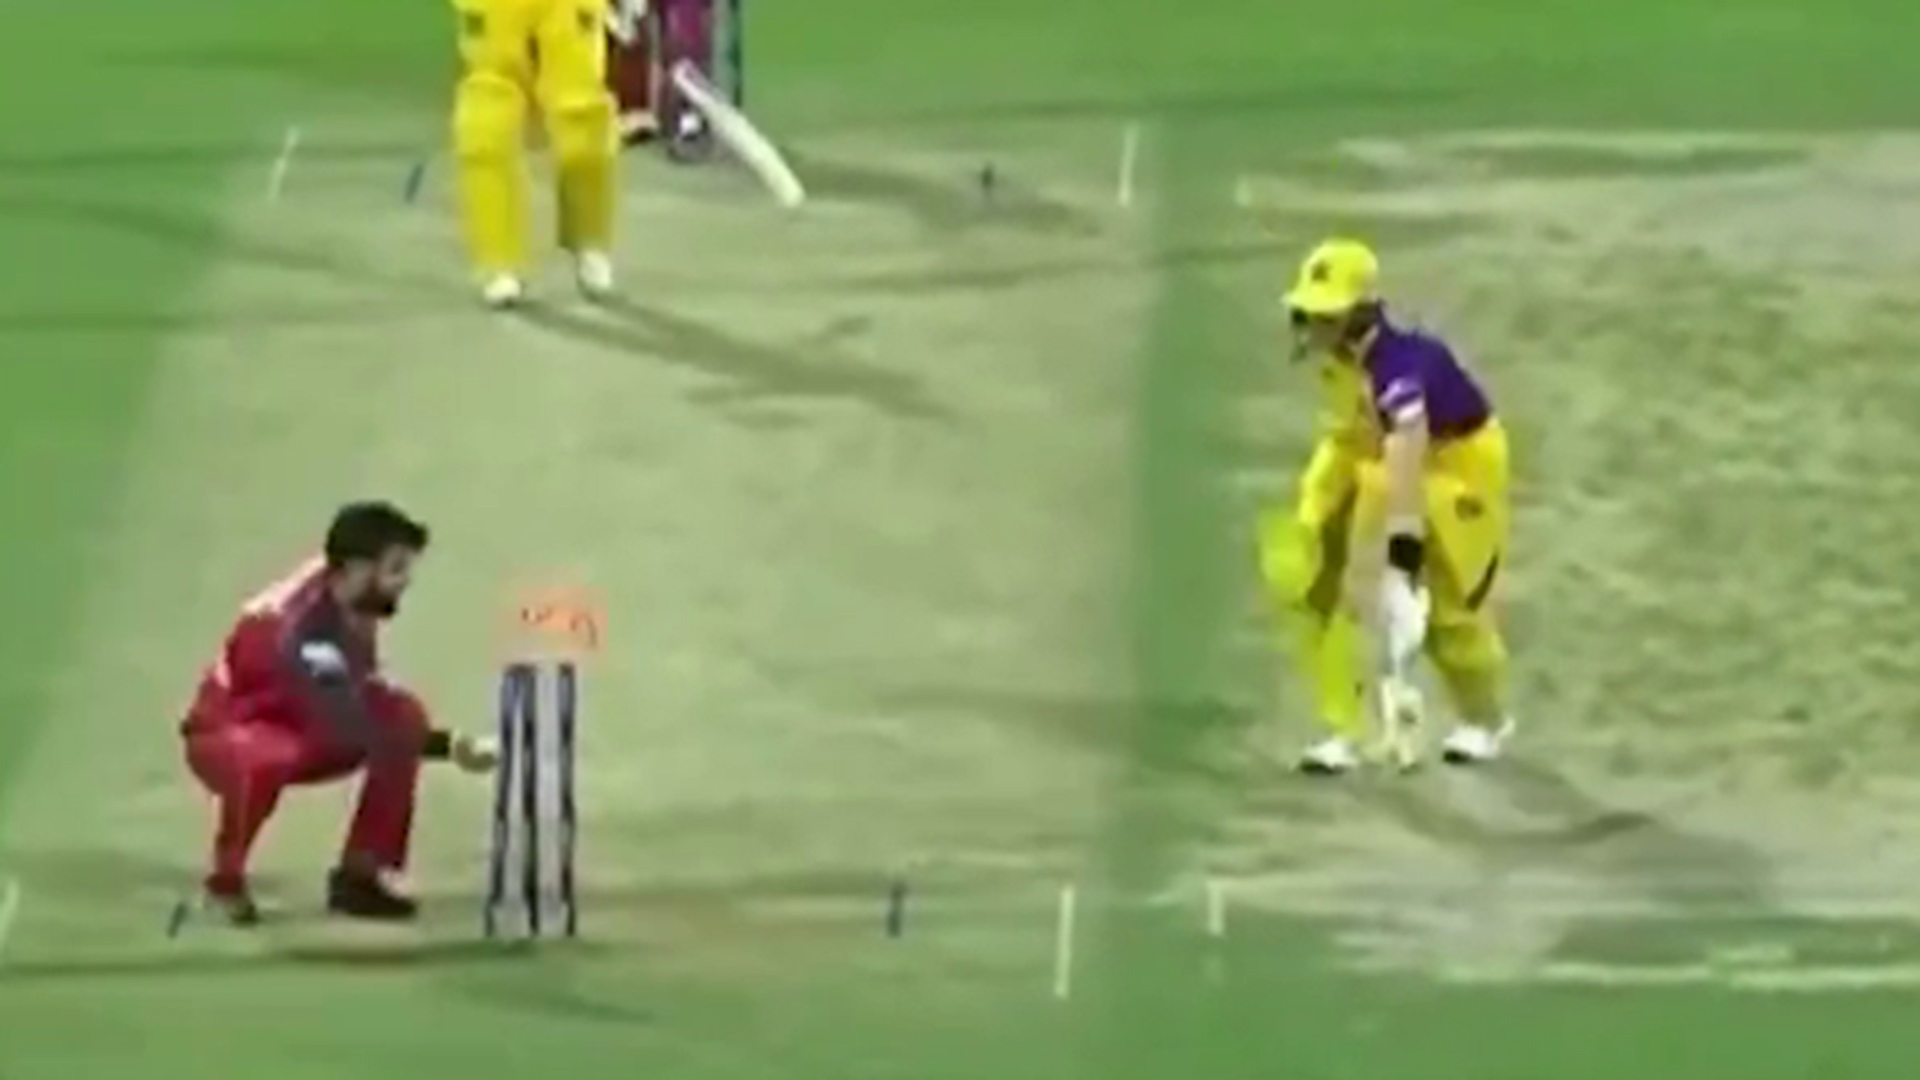 Commentator stunned by 'wonderful' run-out withdrawal